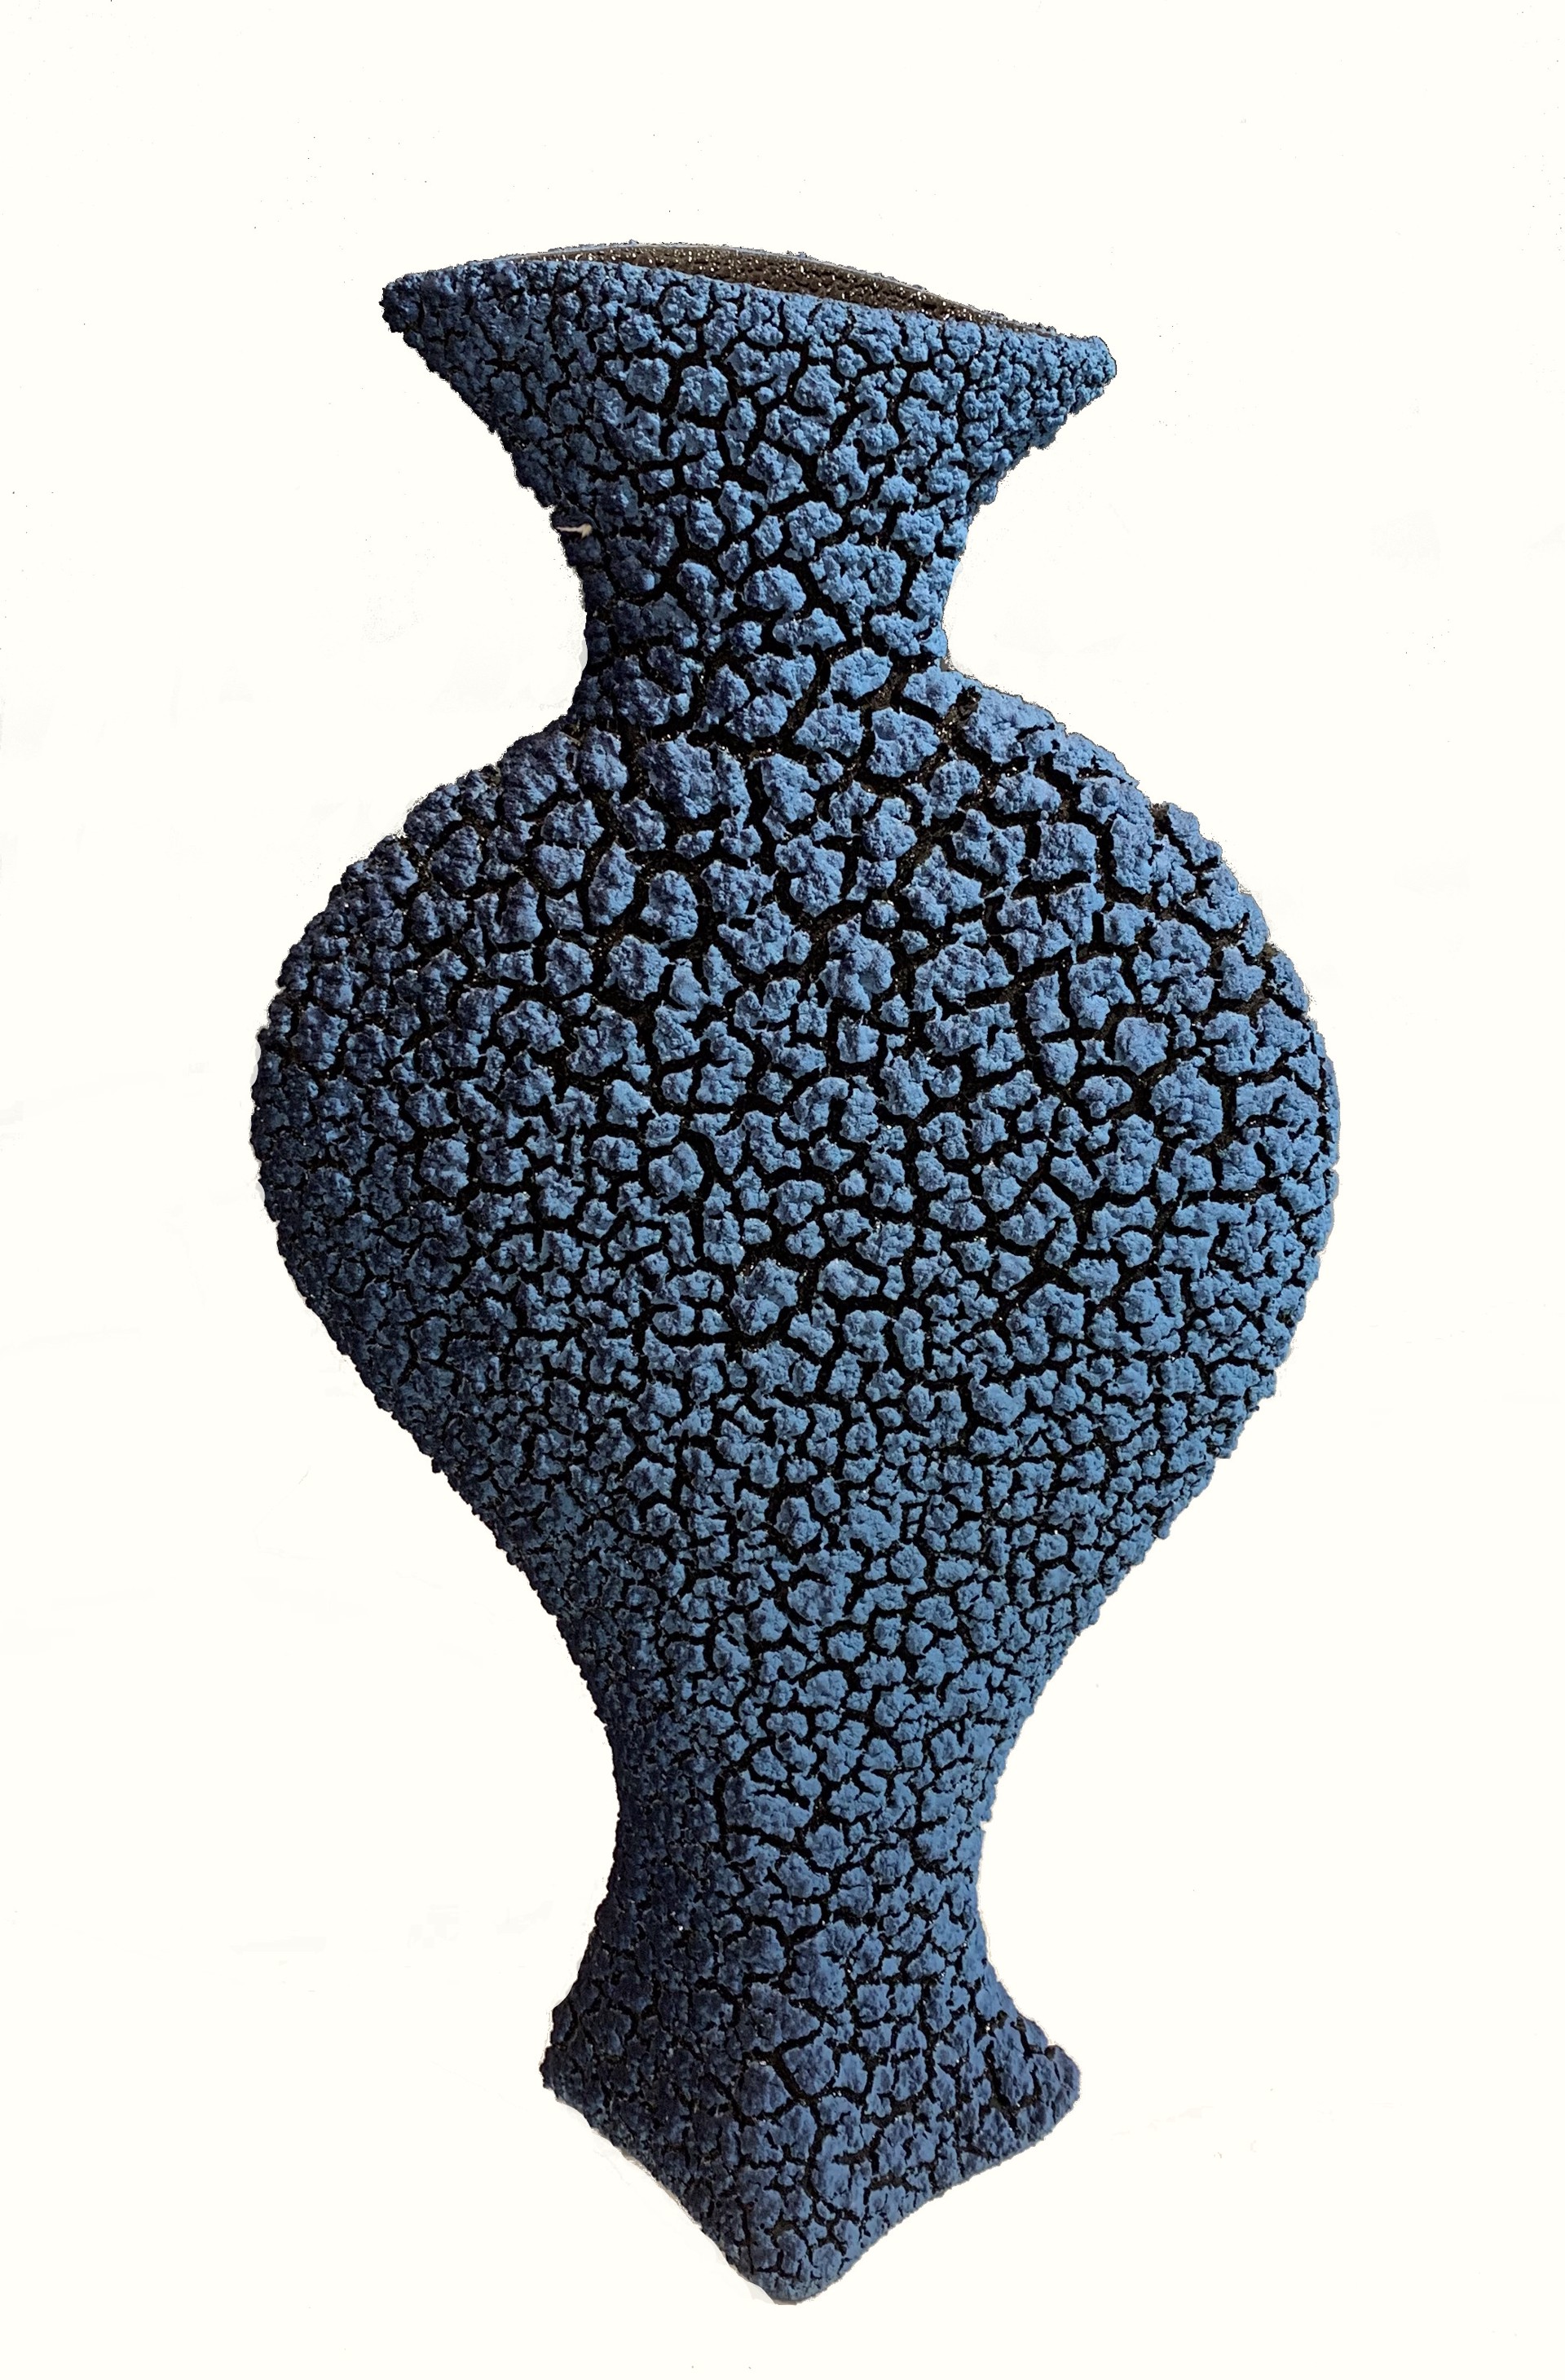 Turquoise Blue and Sapphire Blue "Sedona" Envelope Vase by Randy O'Brien